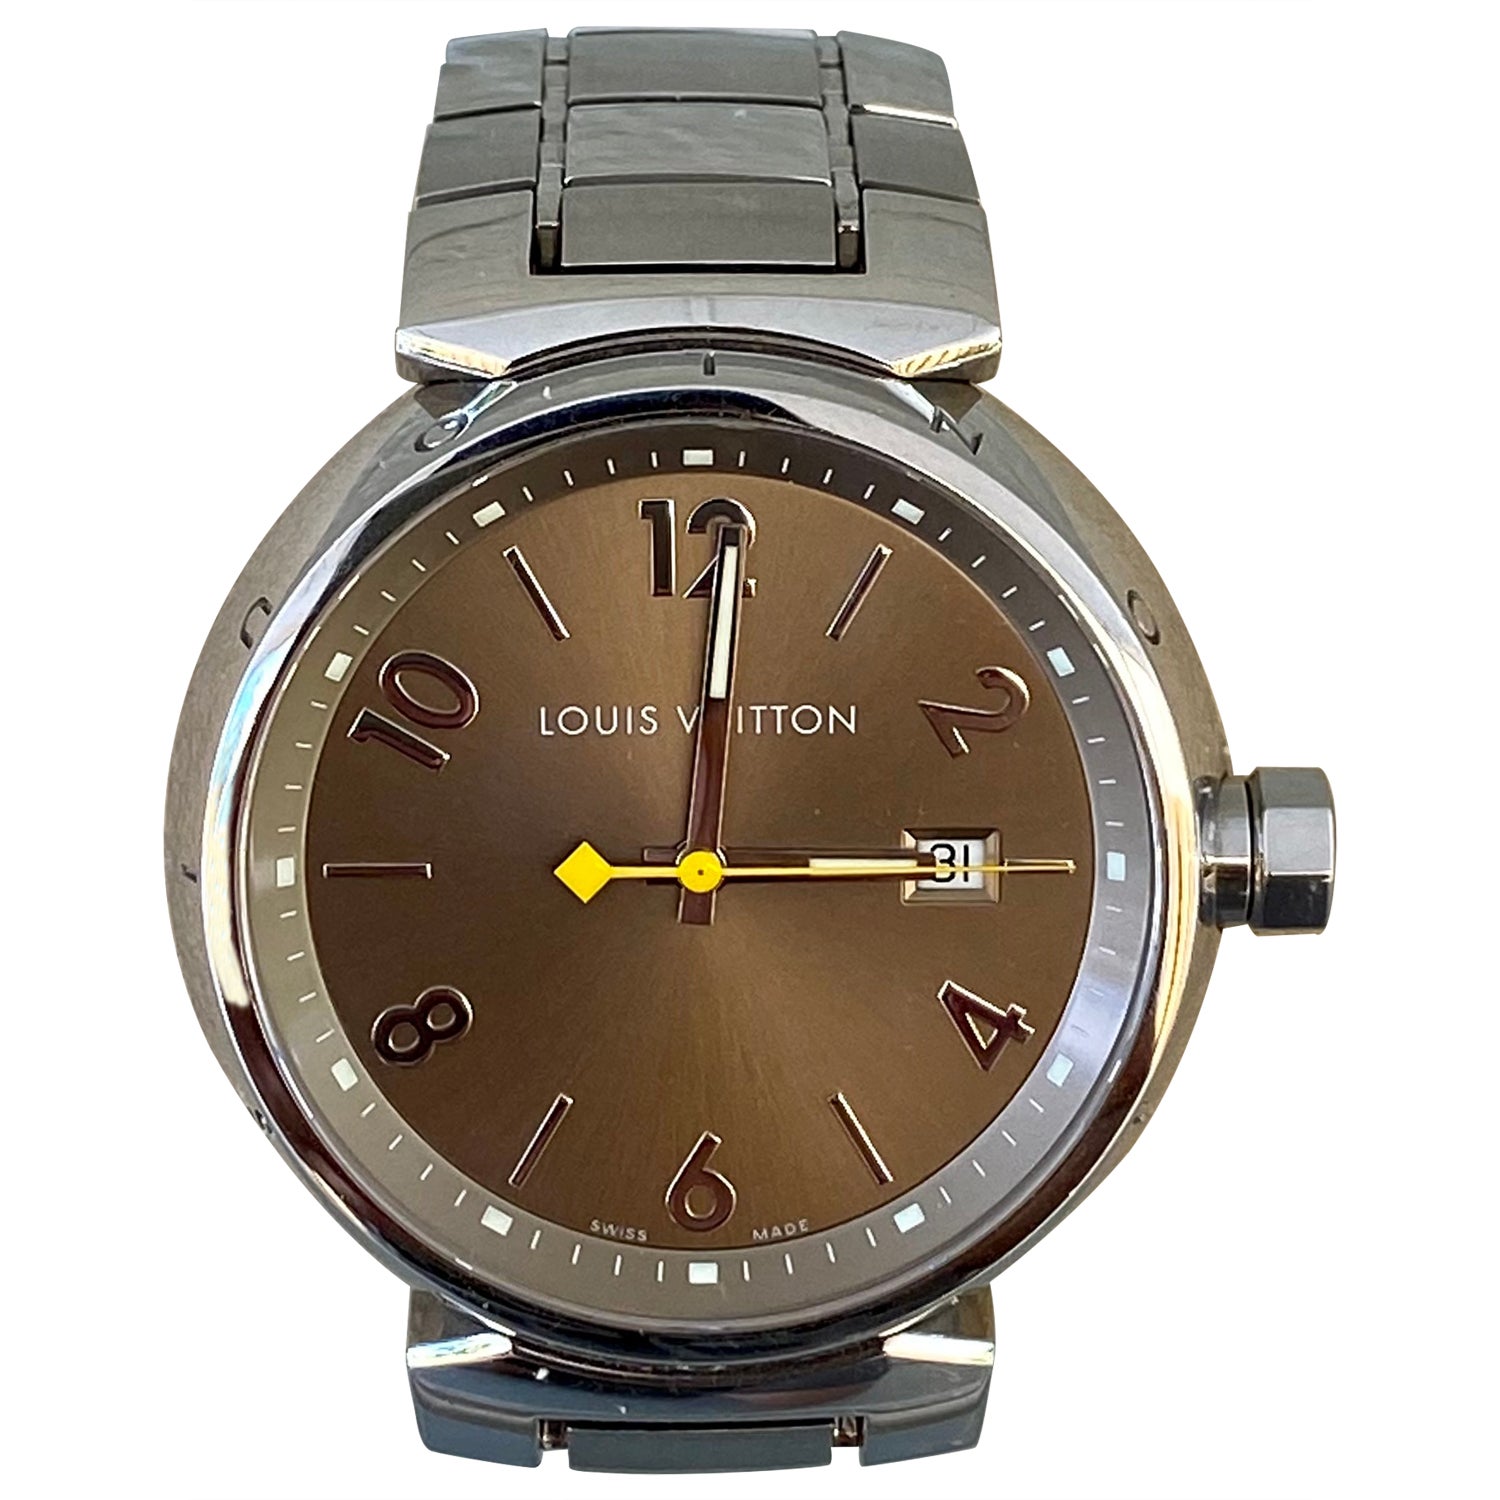 RB Collections - *Louis vuitton watch* *foa Woman* *price:1800